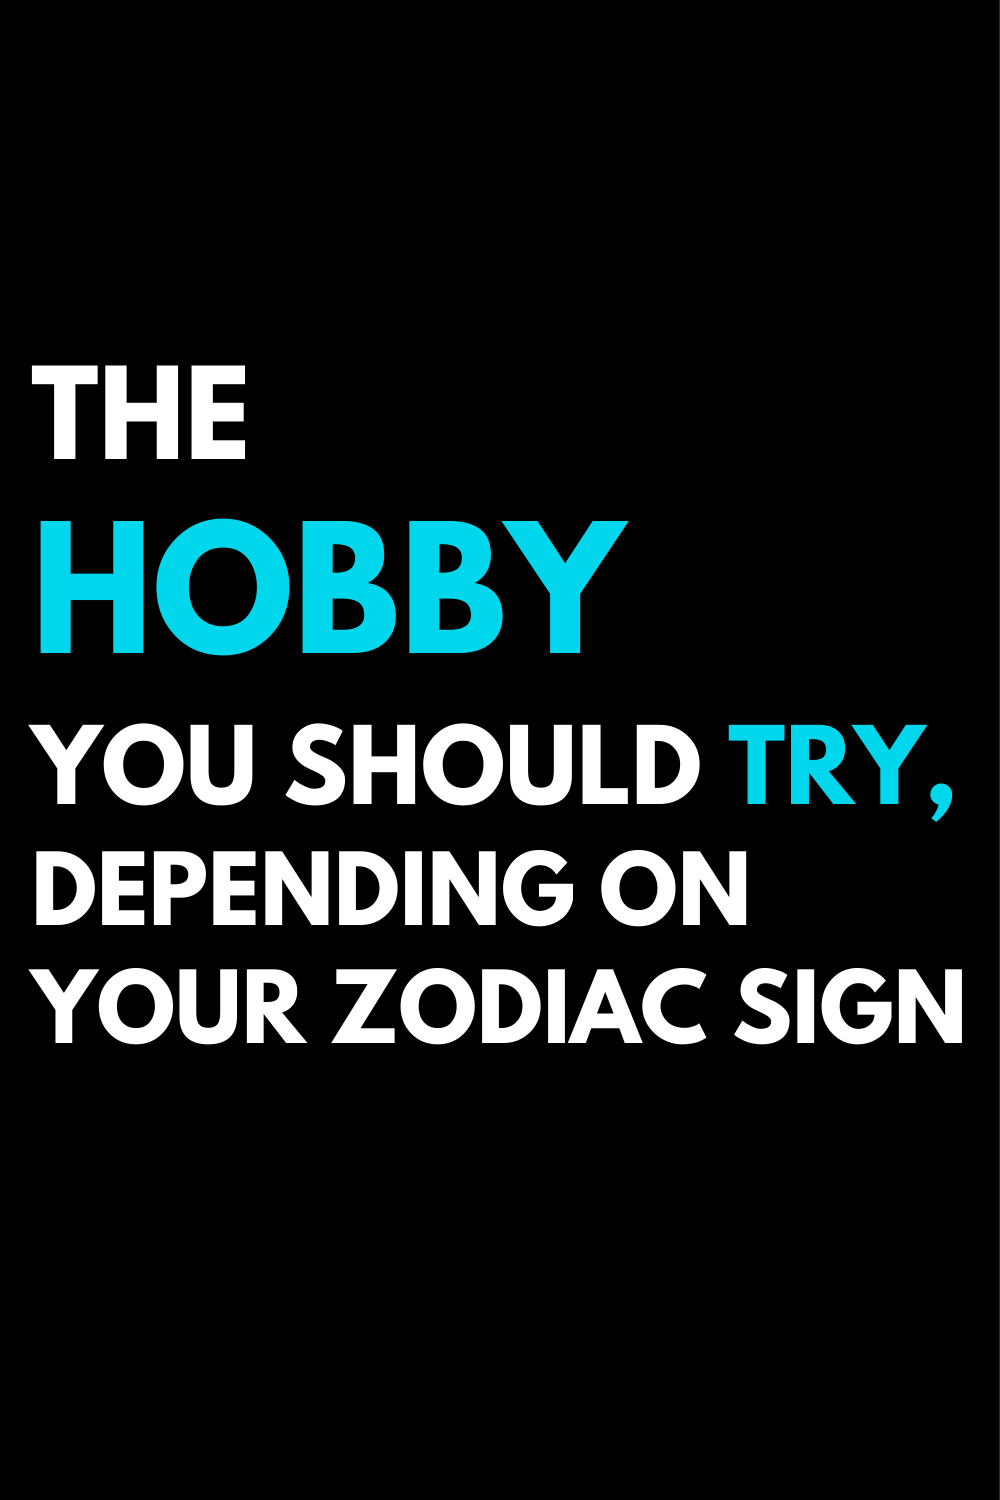 The hobby you should try, depending on your zodiac sign